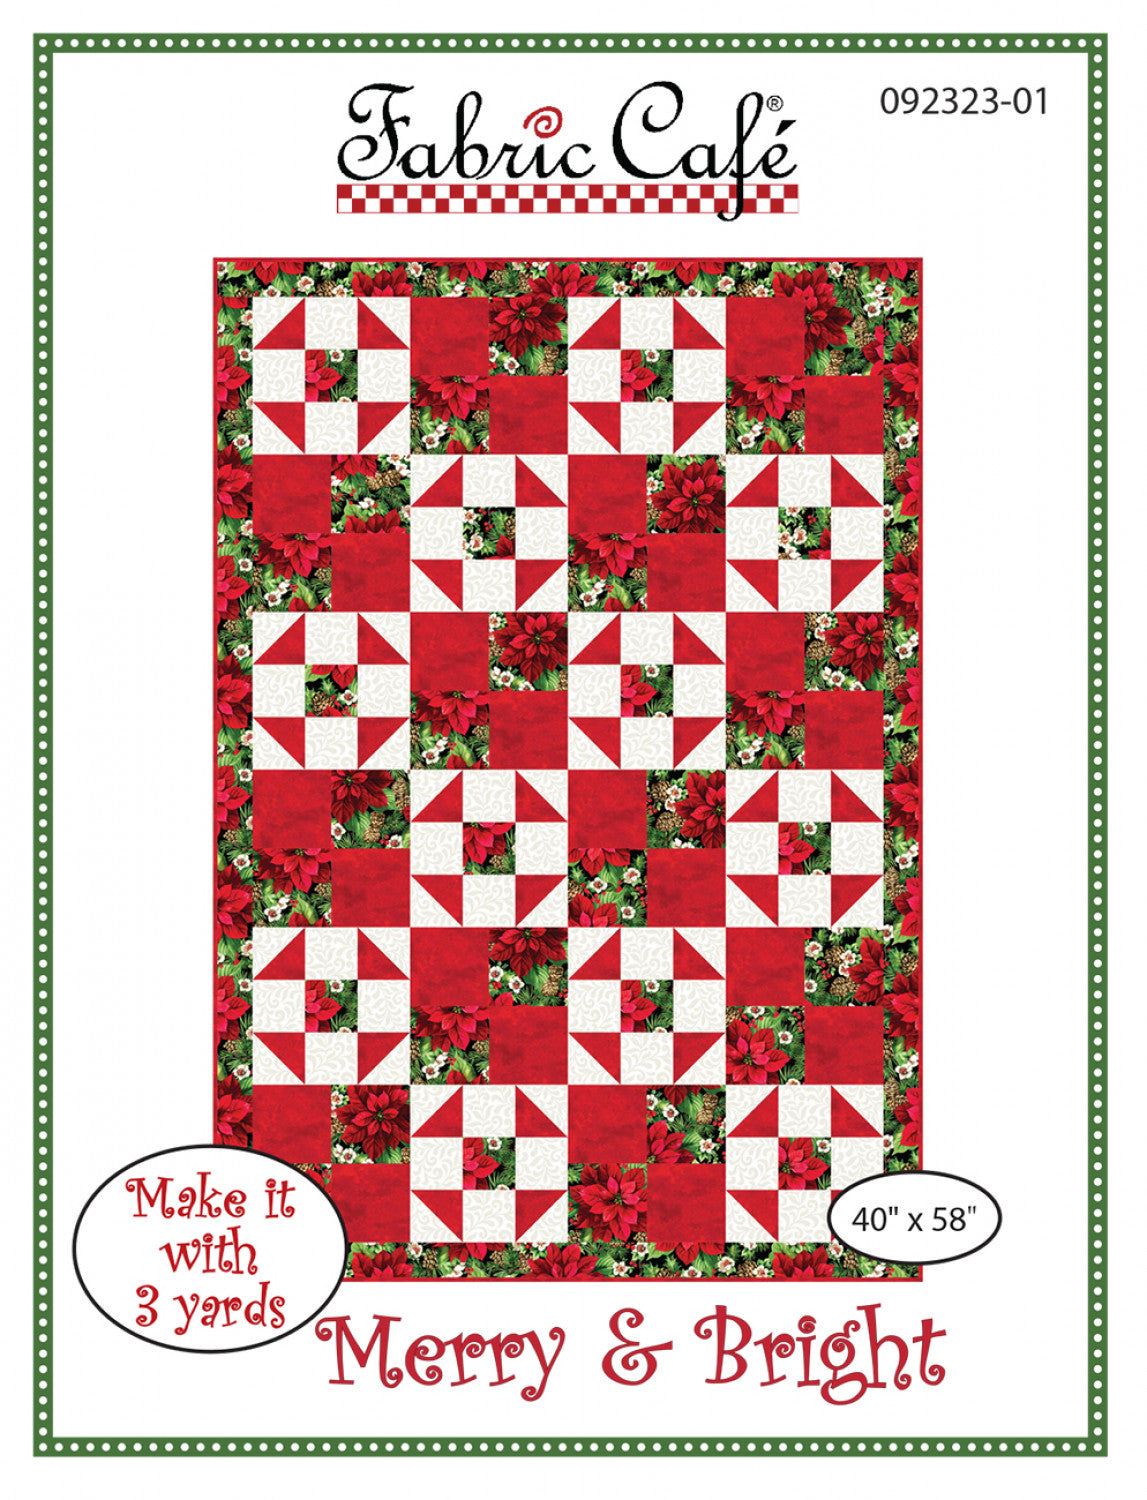 Merry & Bright Quilt Pattern by Fabric Cafe